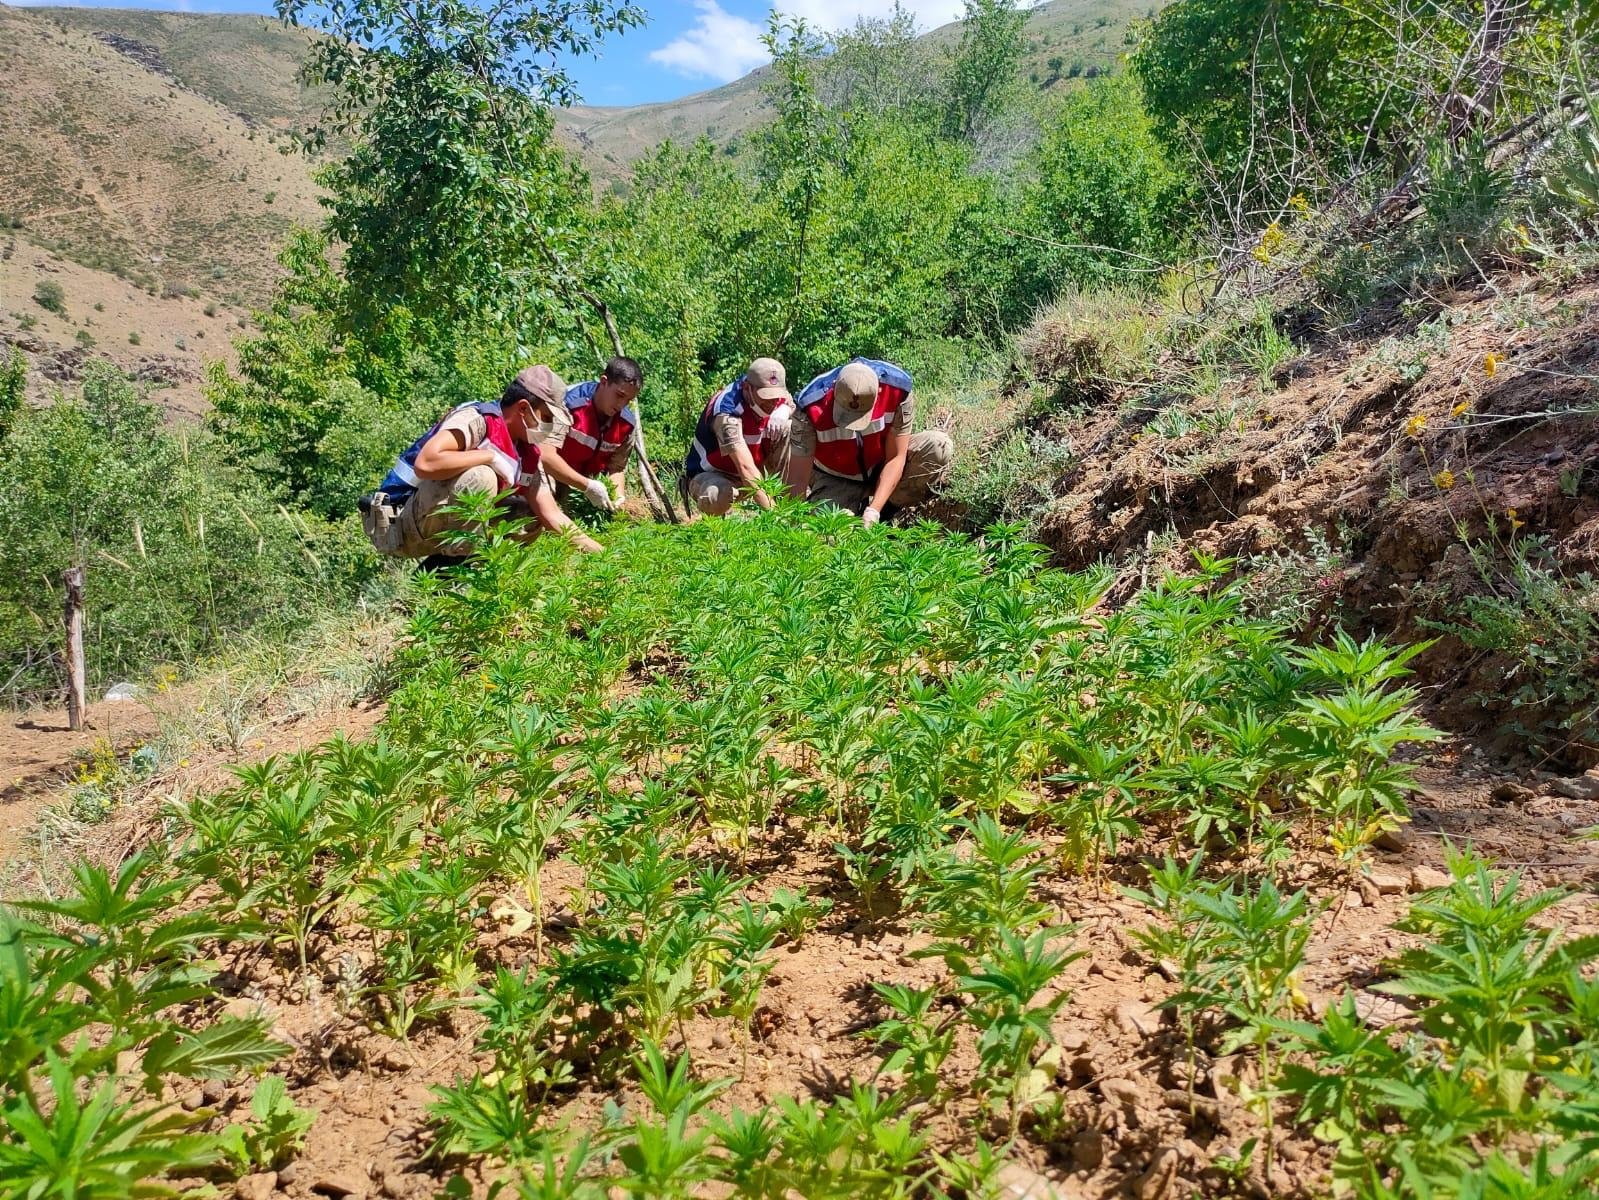 Gendarmerie officials check cannabis plants in a field after a counter-narcotics operation, in Elazığ, eastern Turkey, June 10, 2021. (AA PHOTO) 